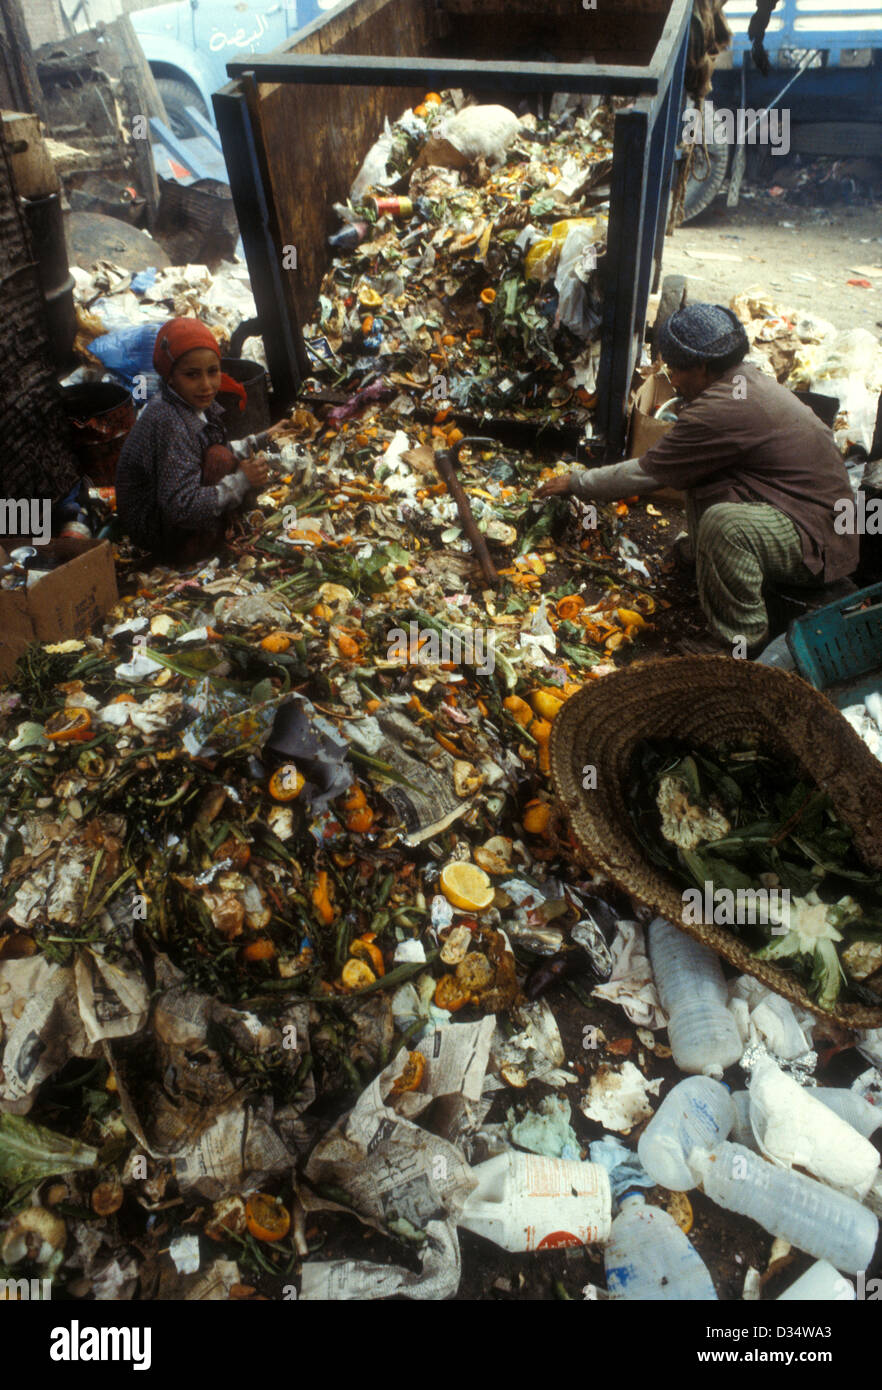 Rubbish pickers in an old part of Cairo, Egypt, look for things to recycle and sell Stock Photo